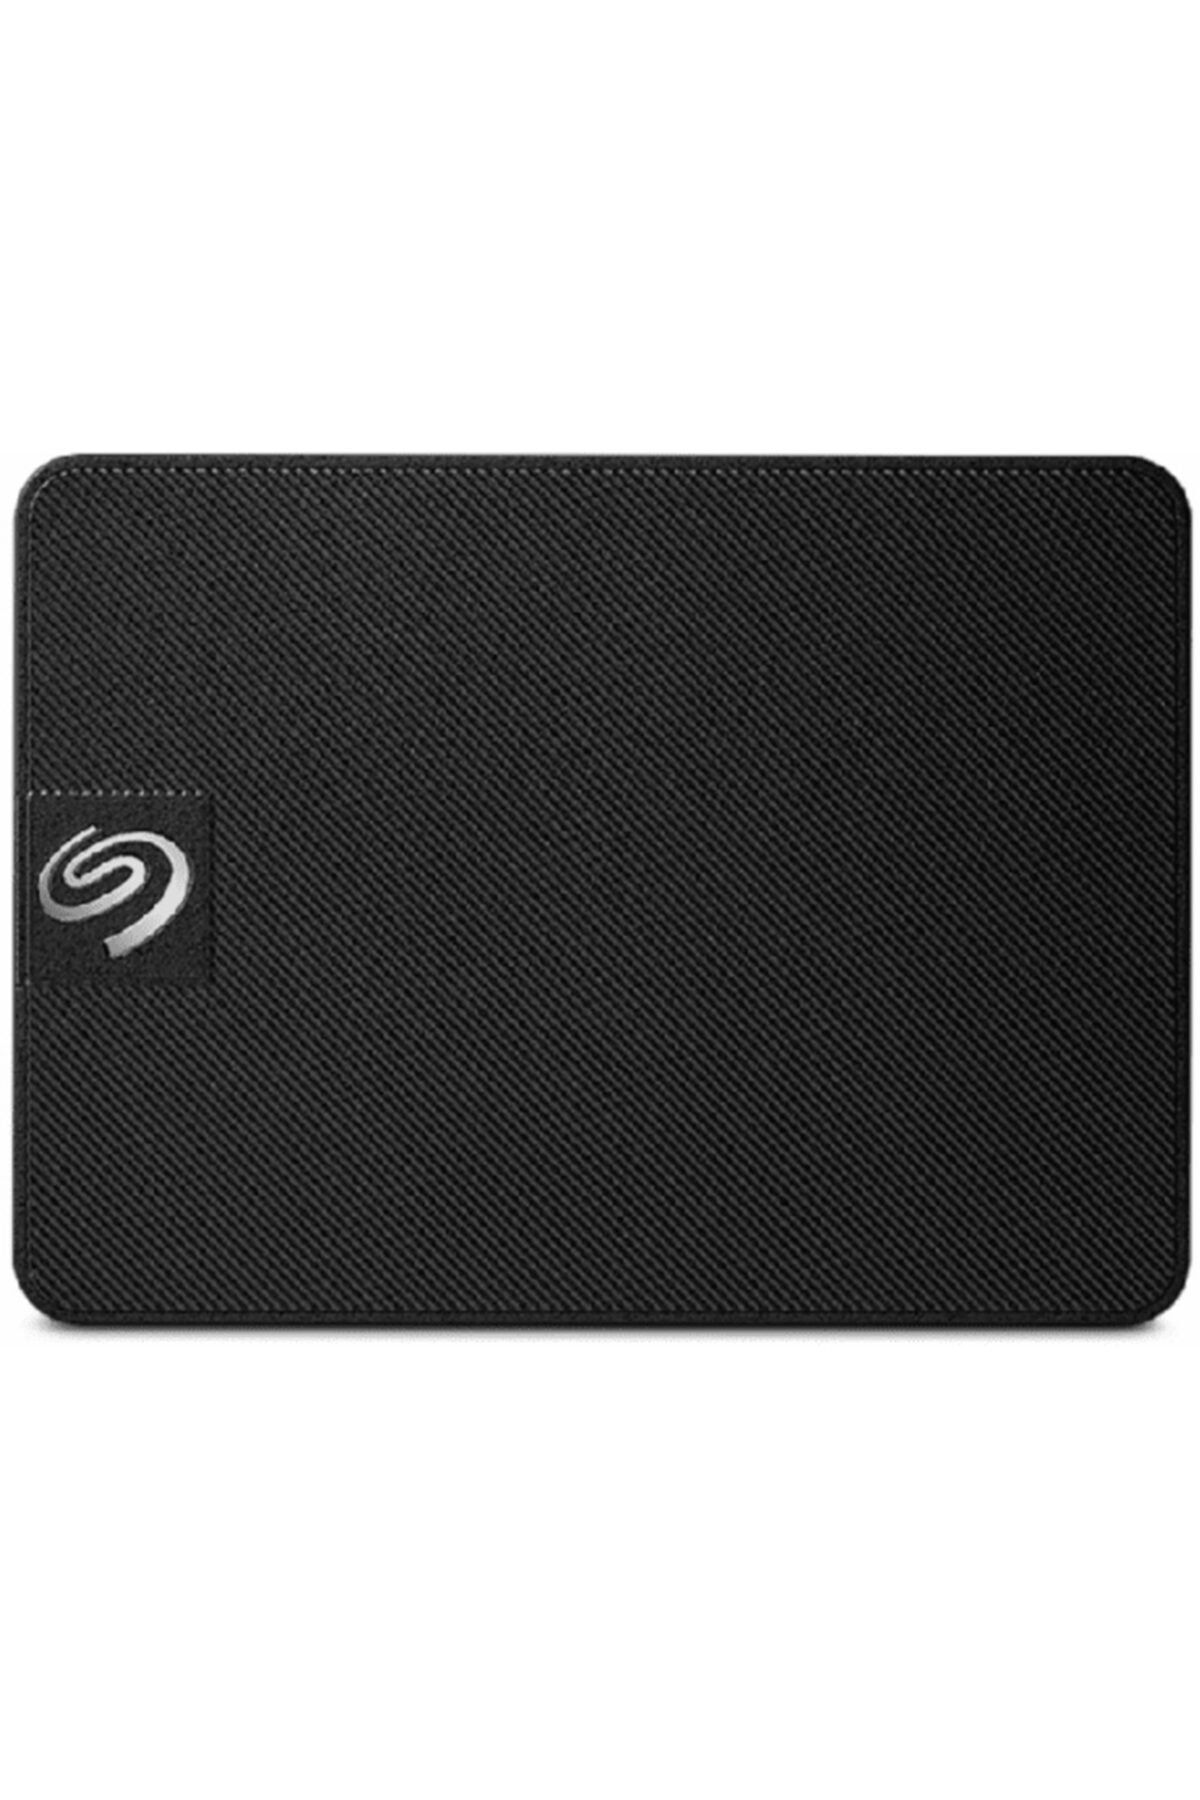 Seagate Expansion 4TB STKM4000400 Expansion Portable 2.5 Usb3.0 4tb Harici Disk